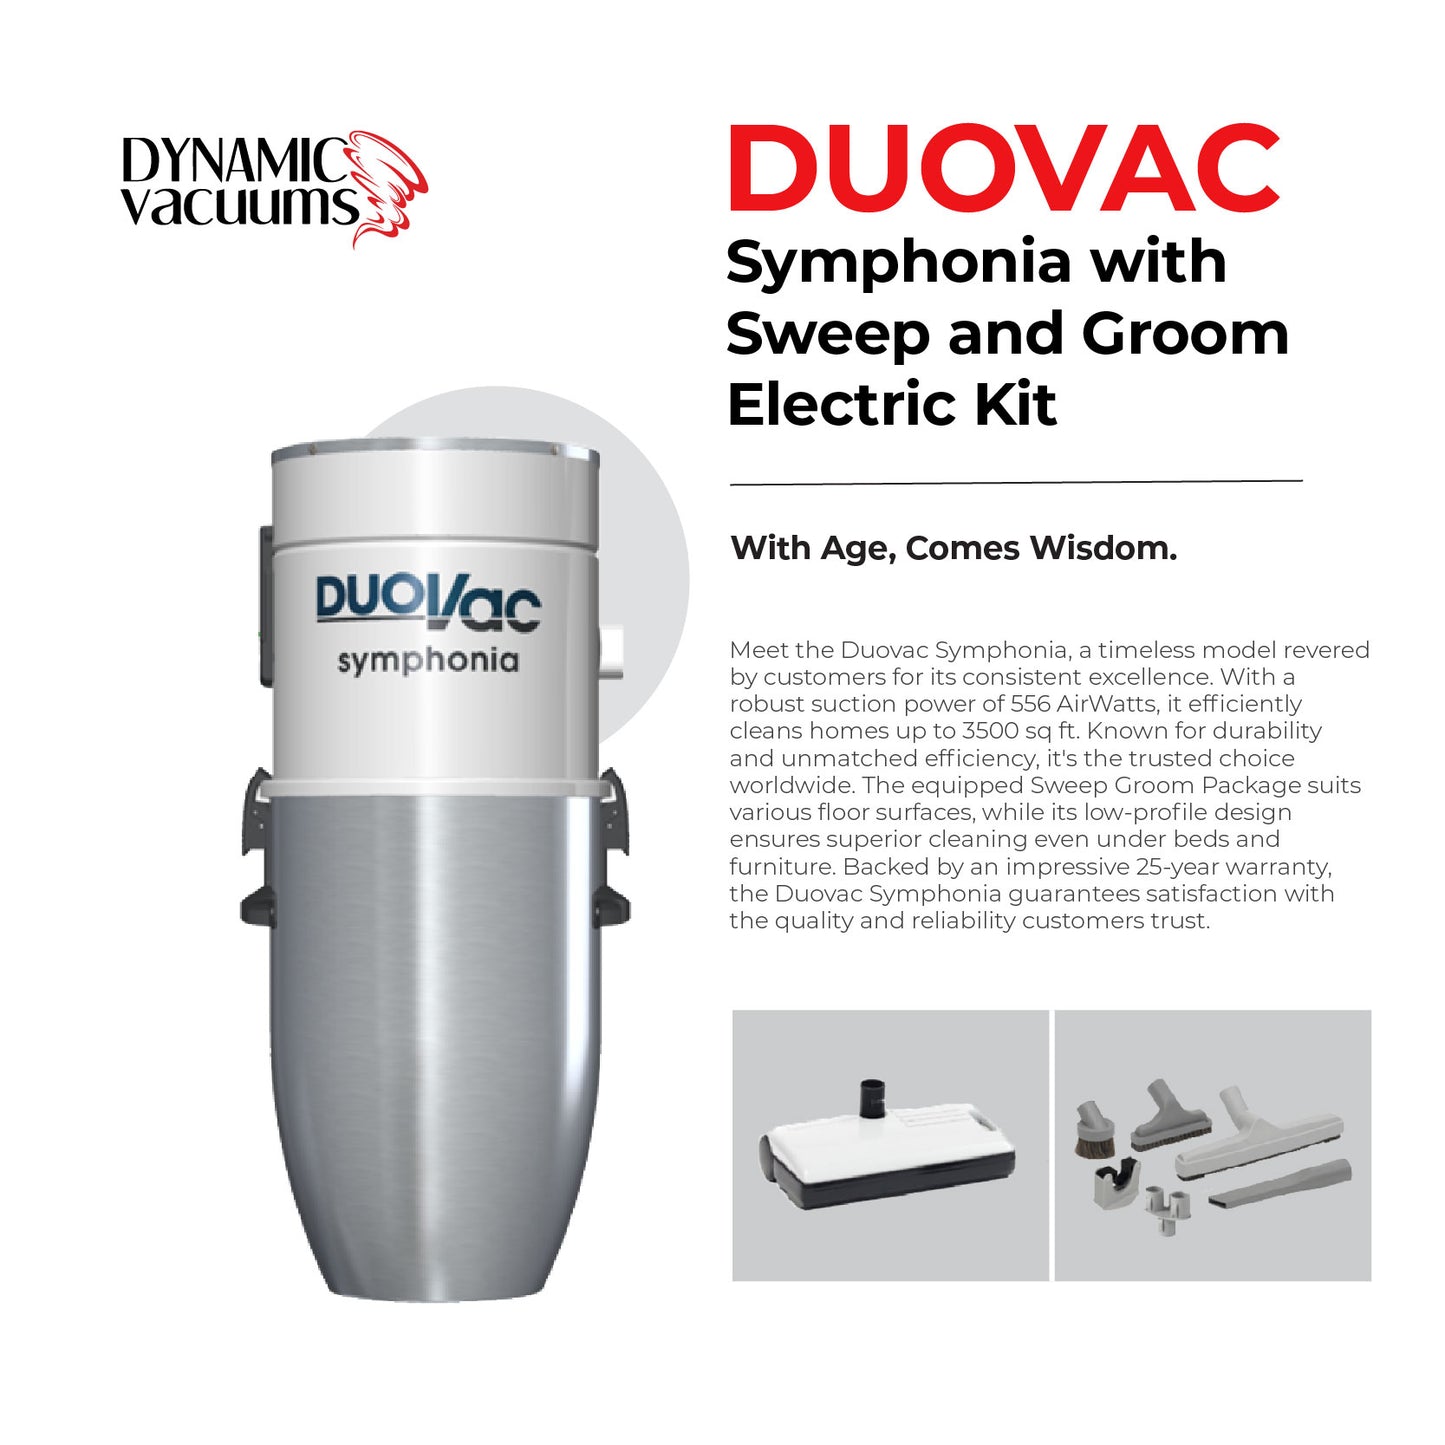 Duovac Symphonia with Sweep and Groom Electric Kit